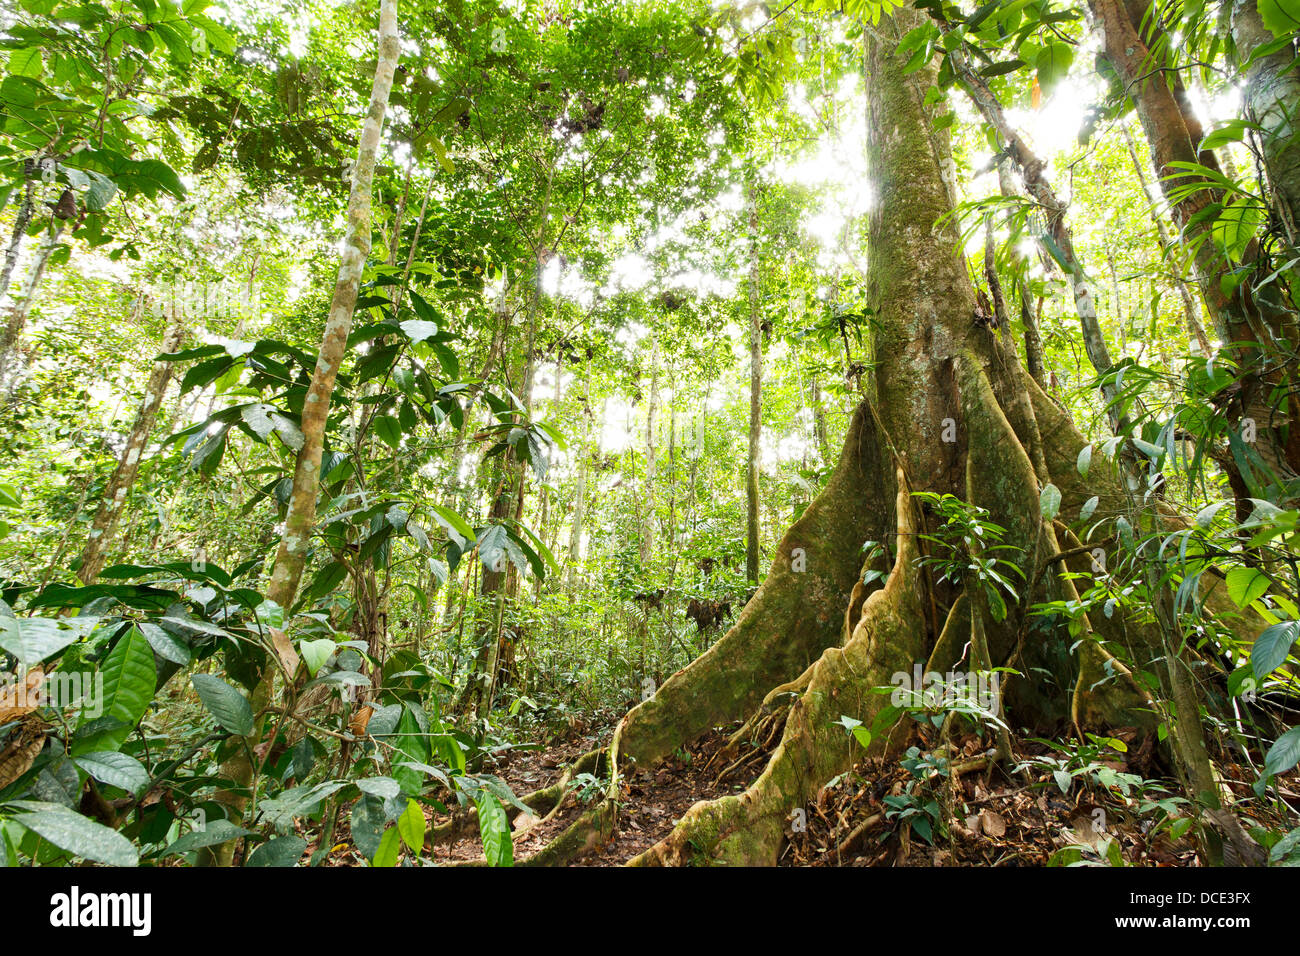 Large tree in primary tropical rainforest with buttress roots, Ecuador Stock Photo